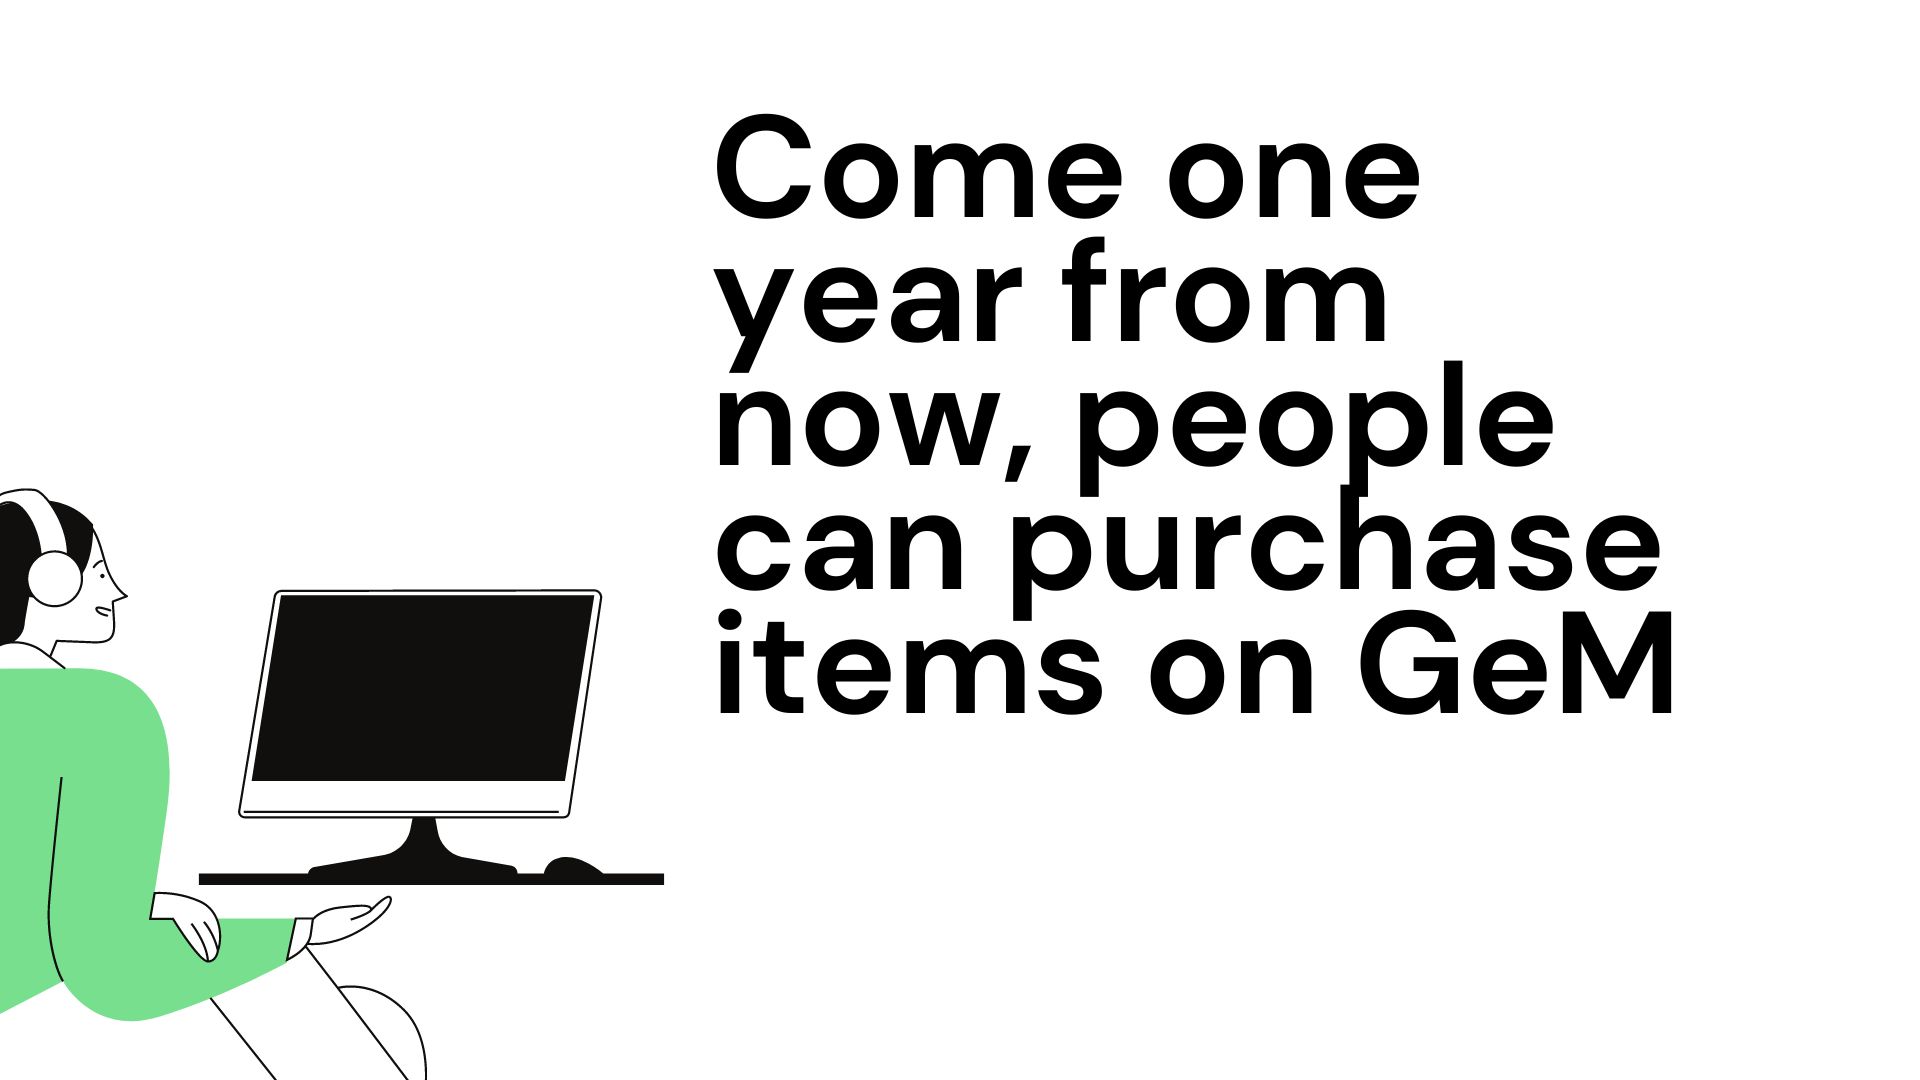 Come one year from now, people can purchase items on GeM (1)